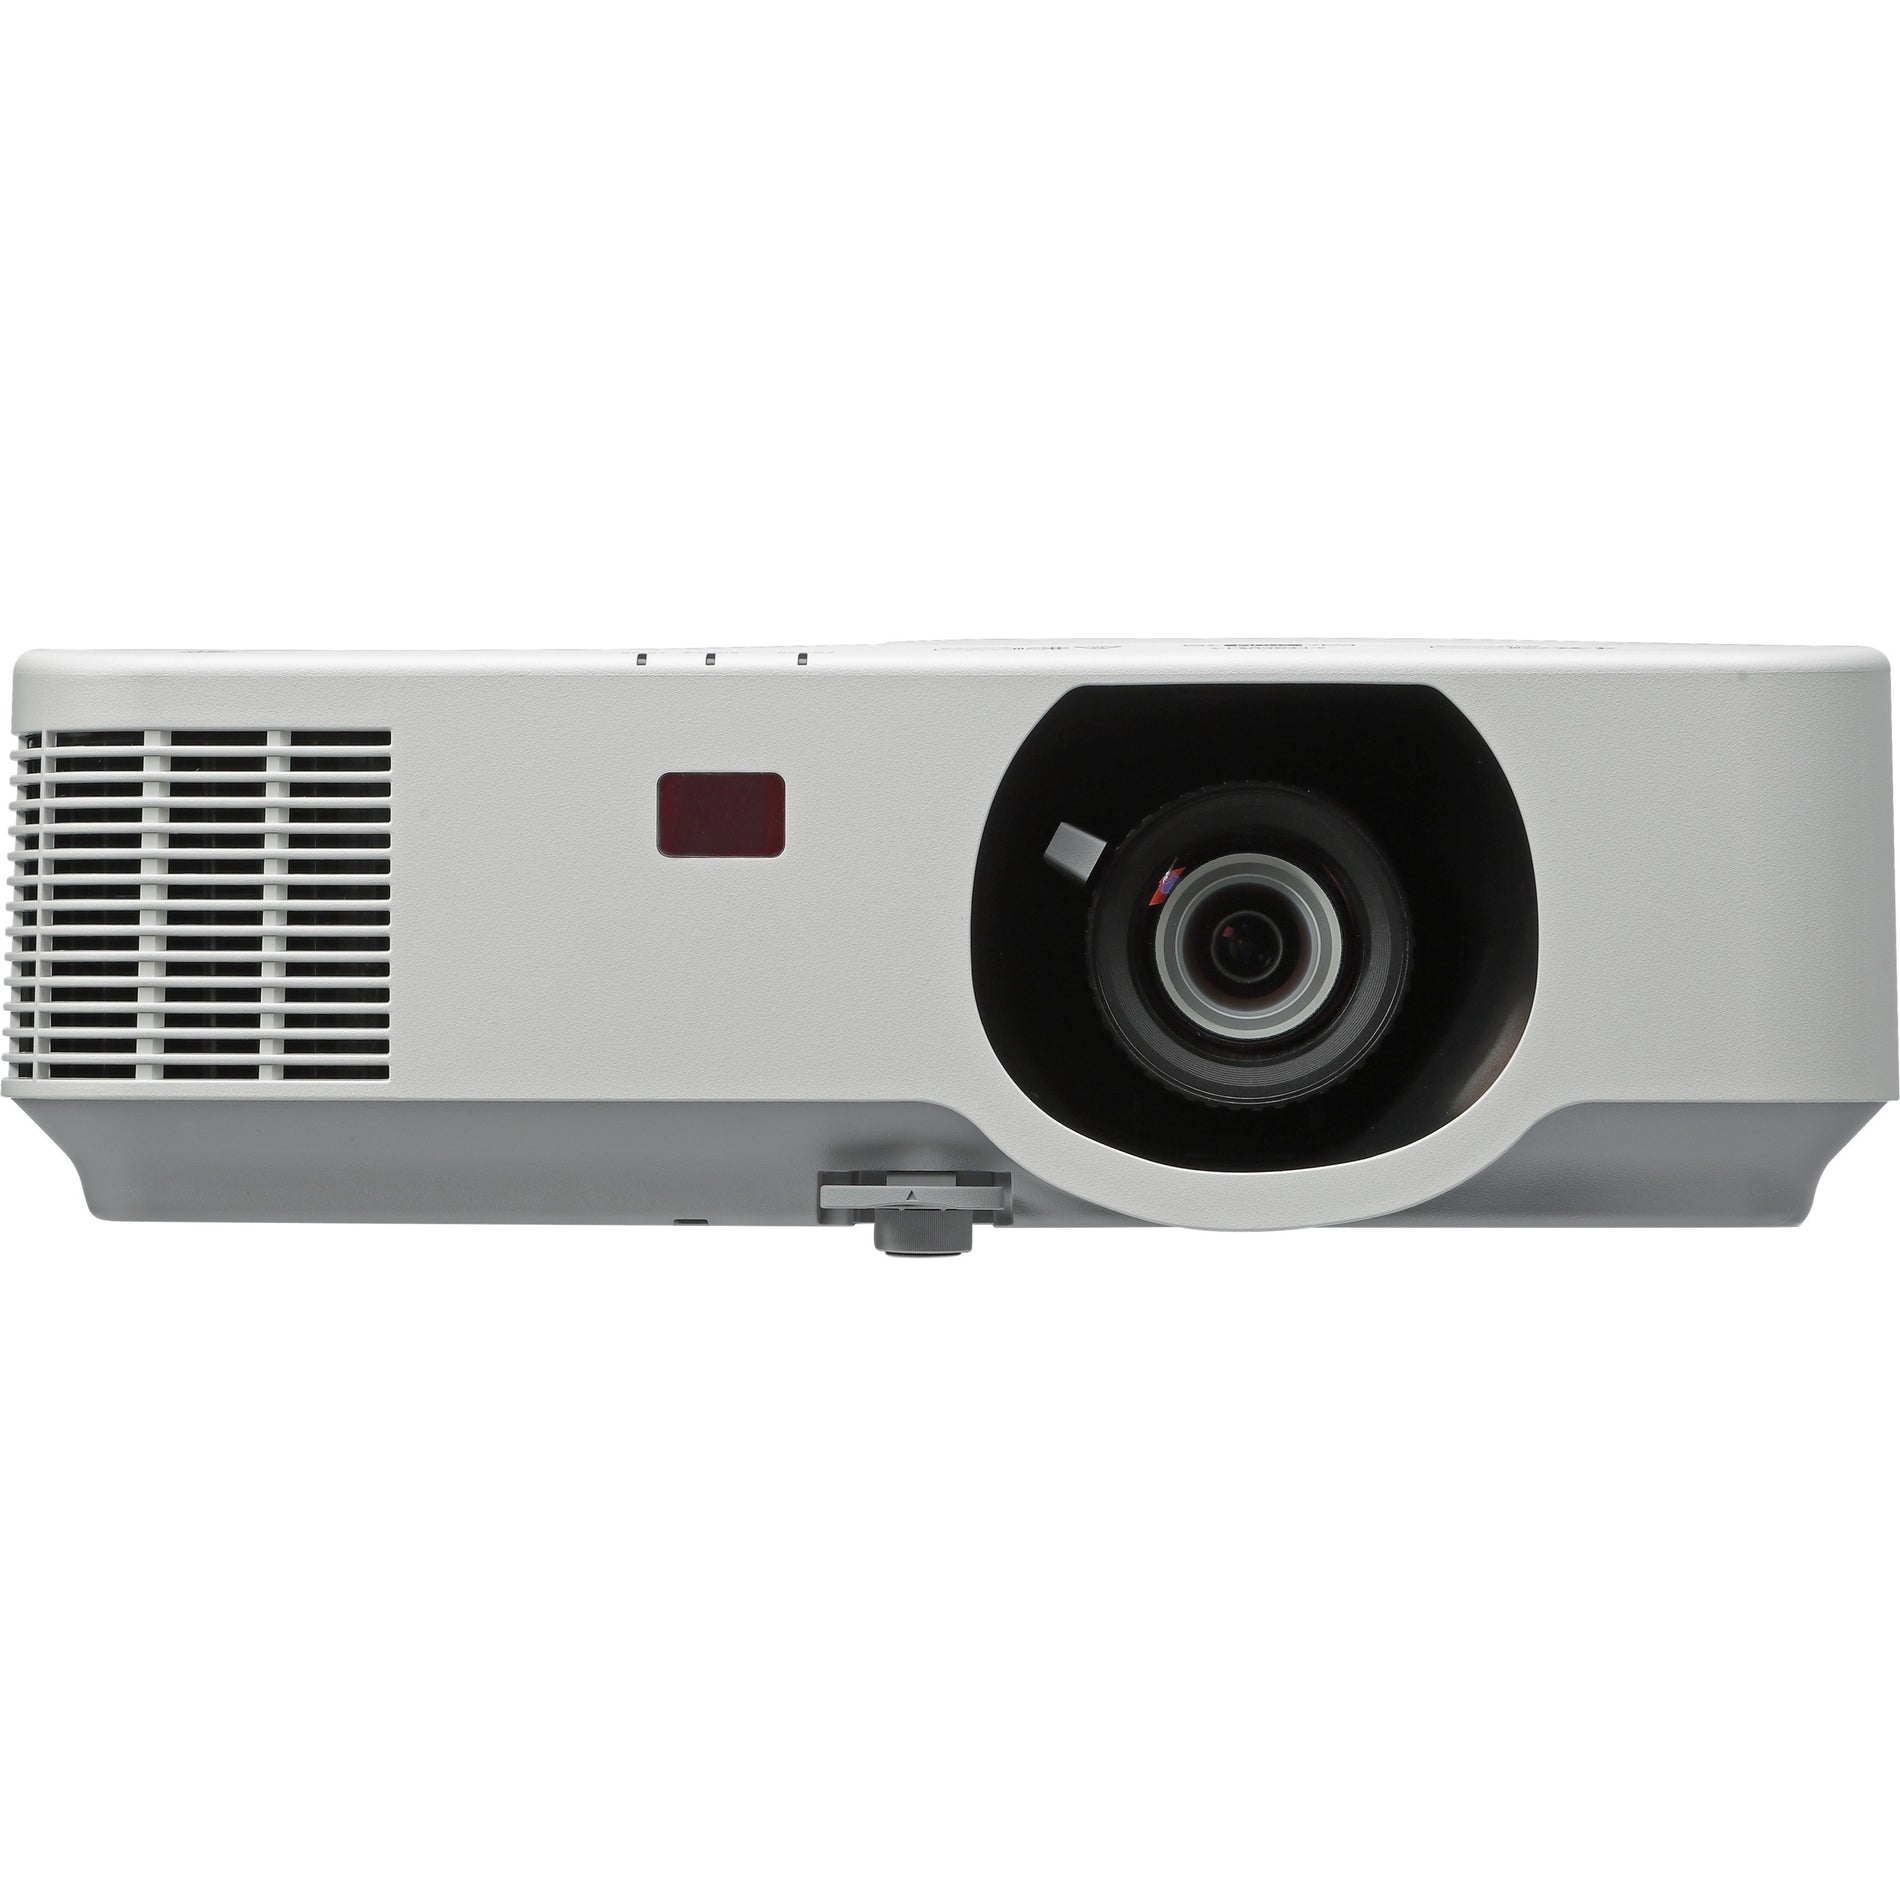 NEC Display P474W LCD Projector - 4700-lumen Entry-Level Professional Installation Projector [Discontinued]